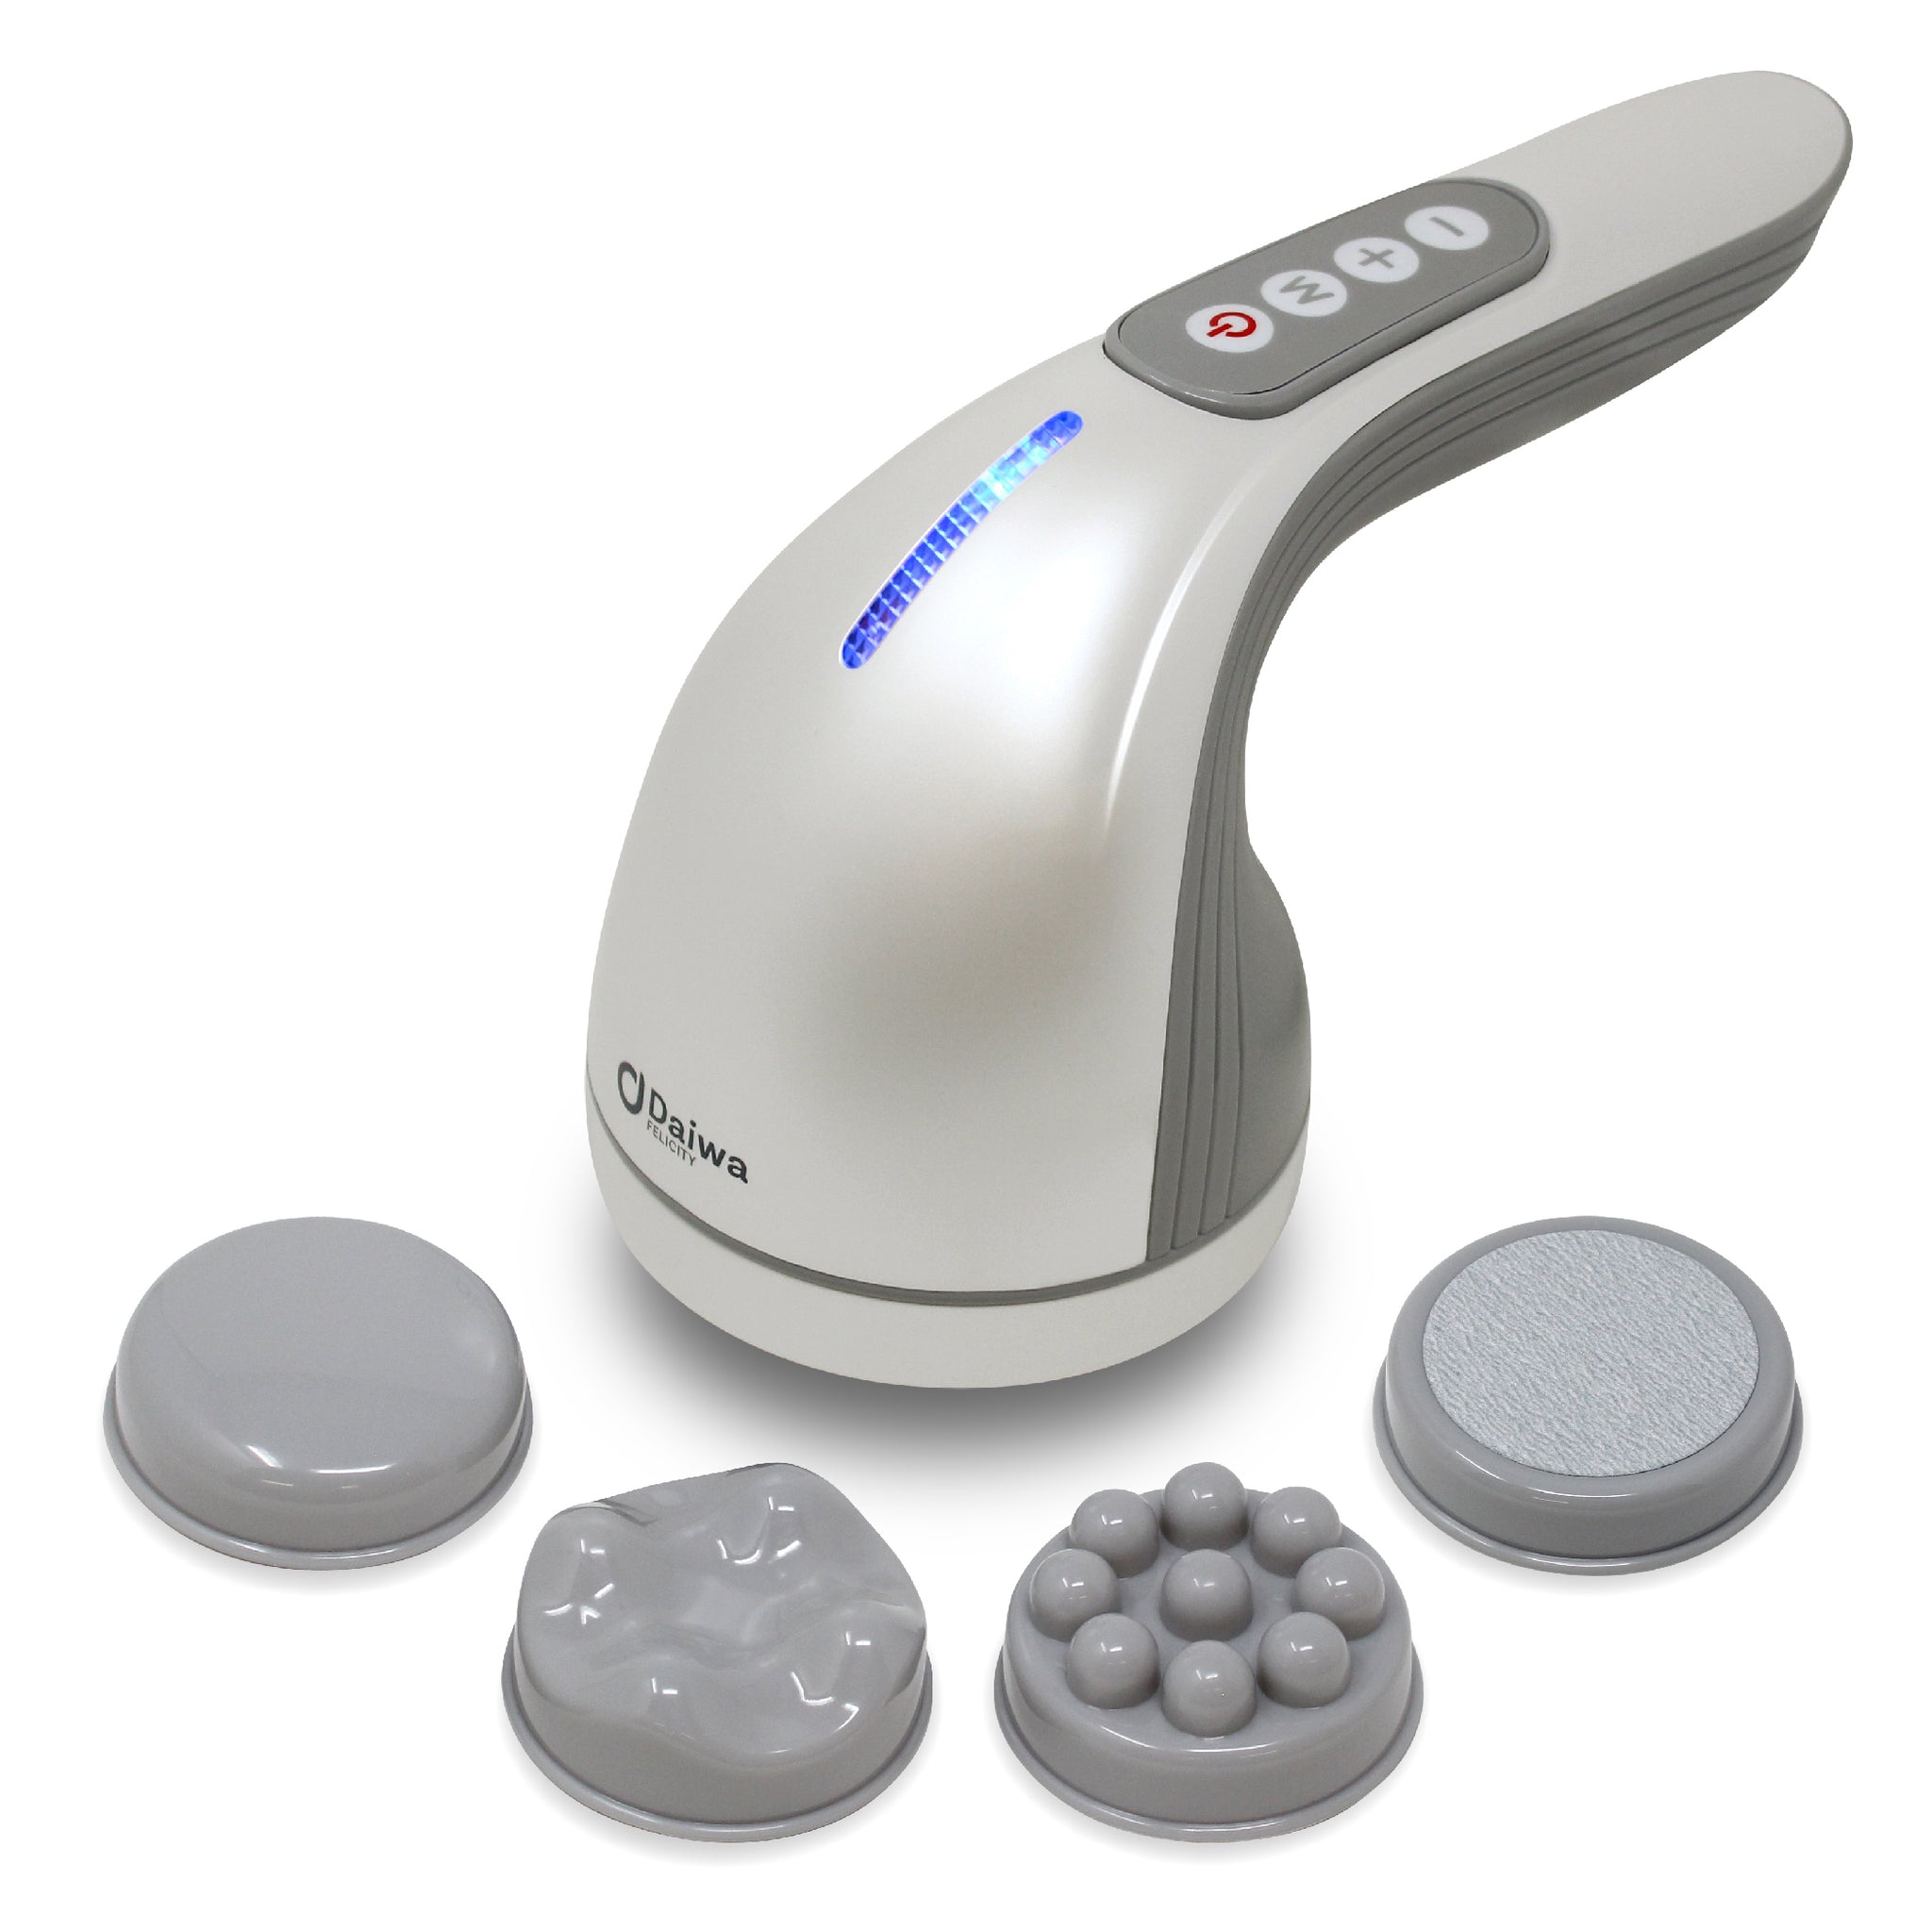 [Refurbished] Multipurpose Body Massager with 4 attachments USJ-883